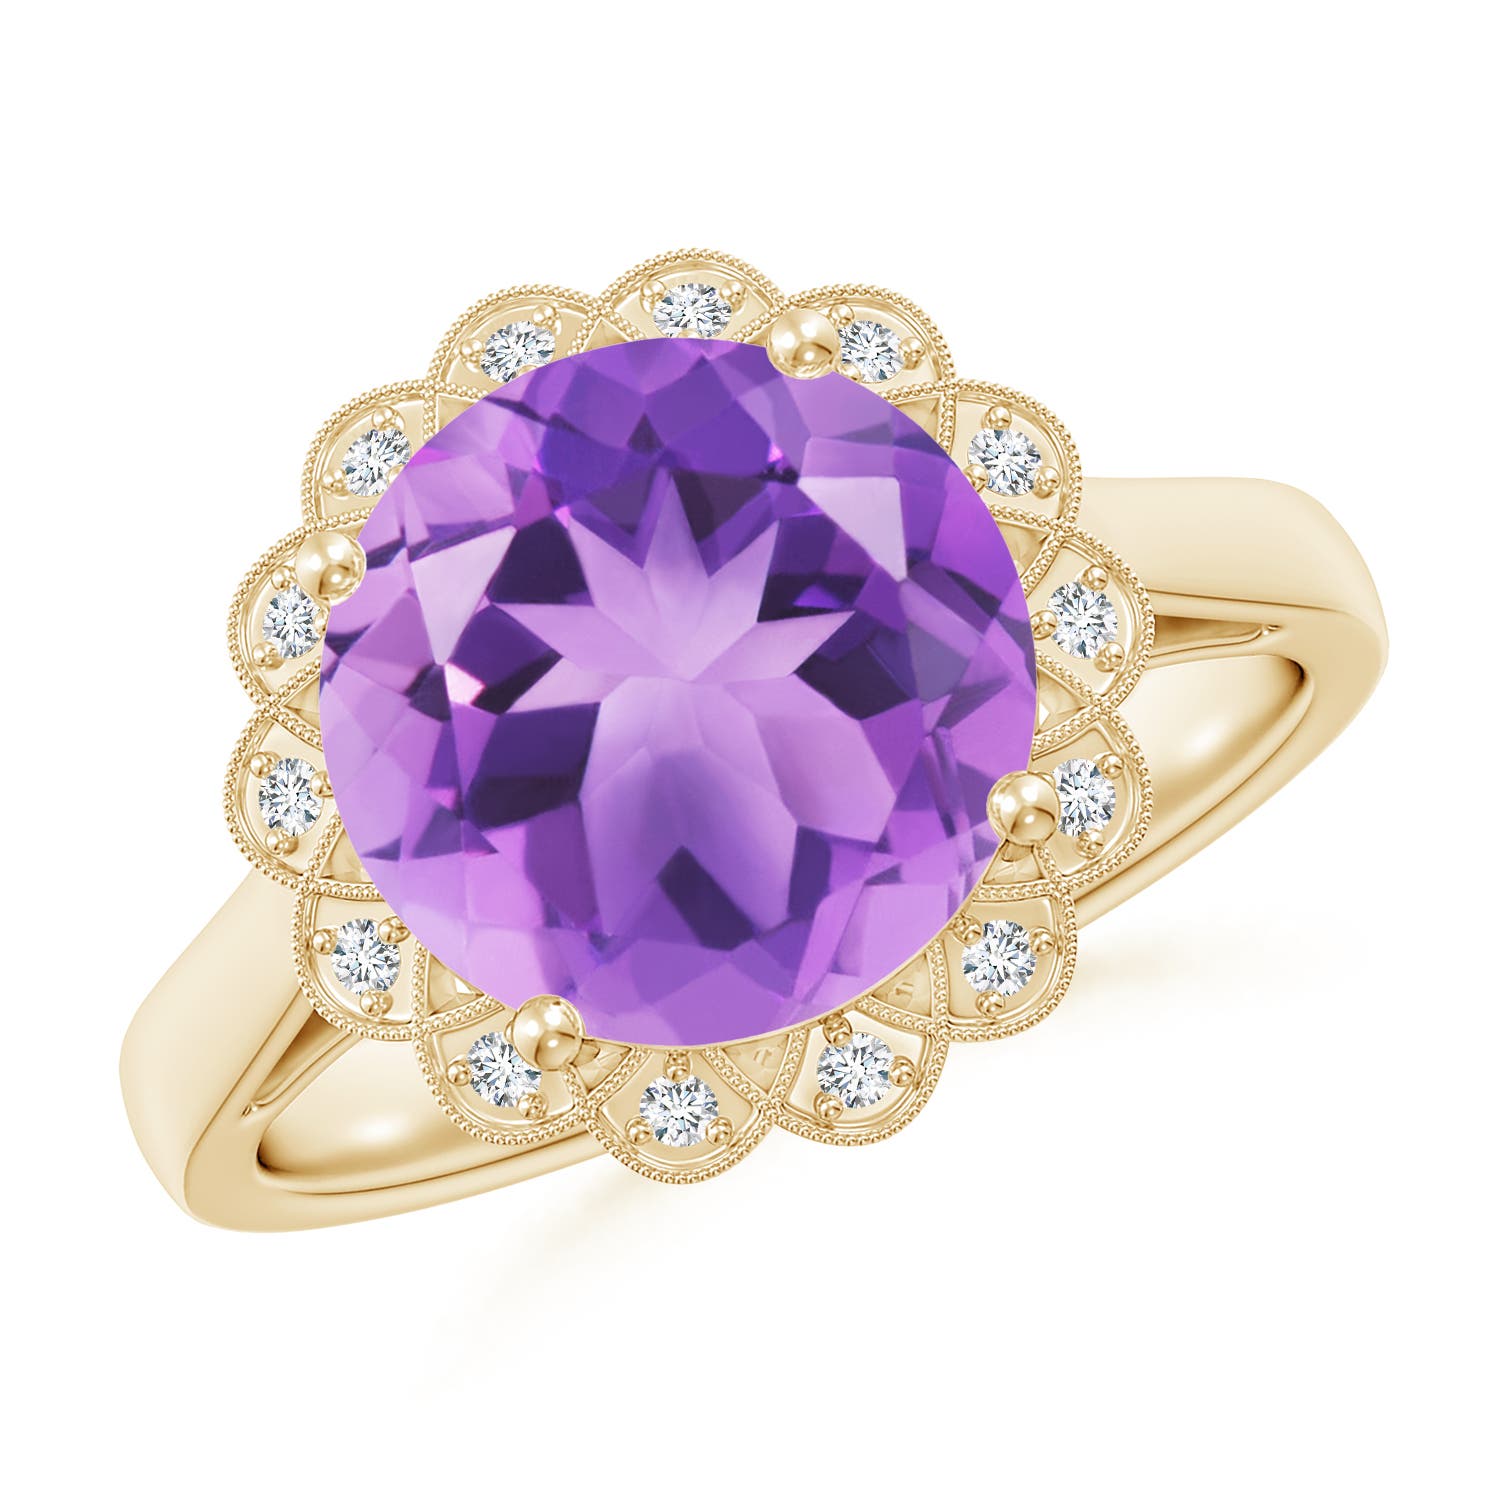 A- Amethyst / 3.28 CT / 14 KT Yellow Gold